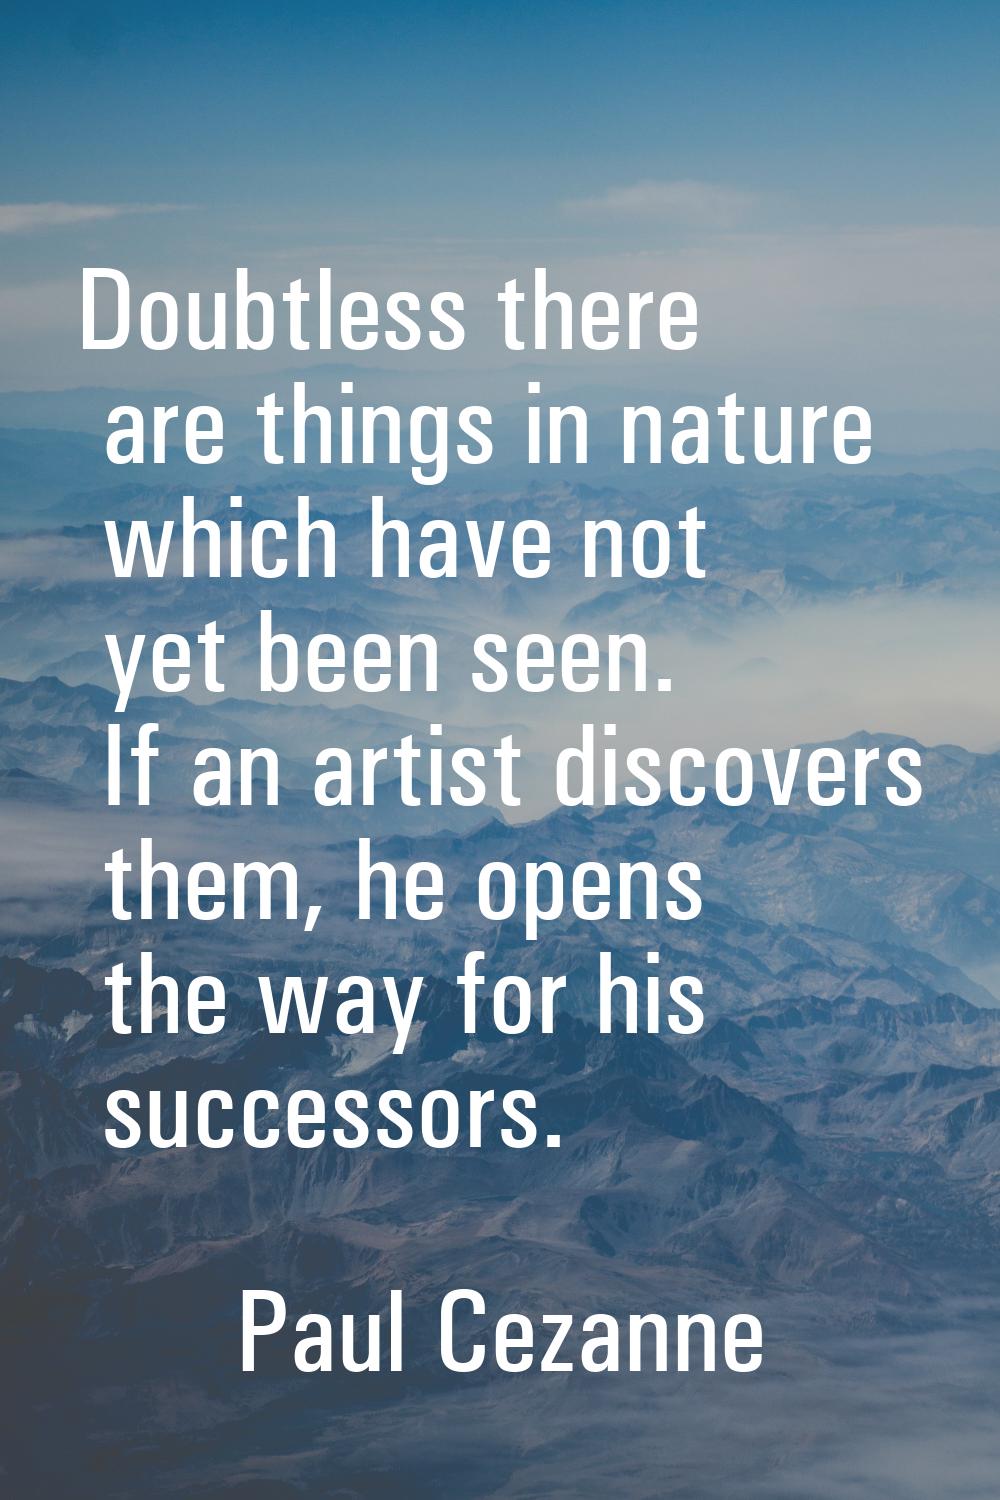 Doubtless there are things in nature which have not yet been seen. If an artist discovers them, he 